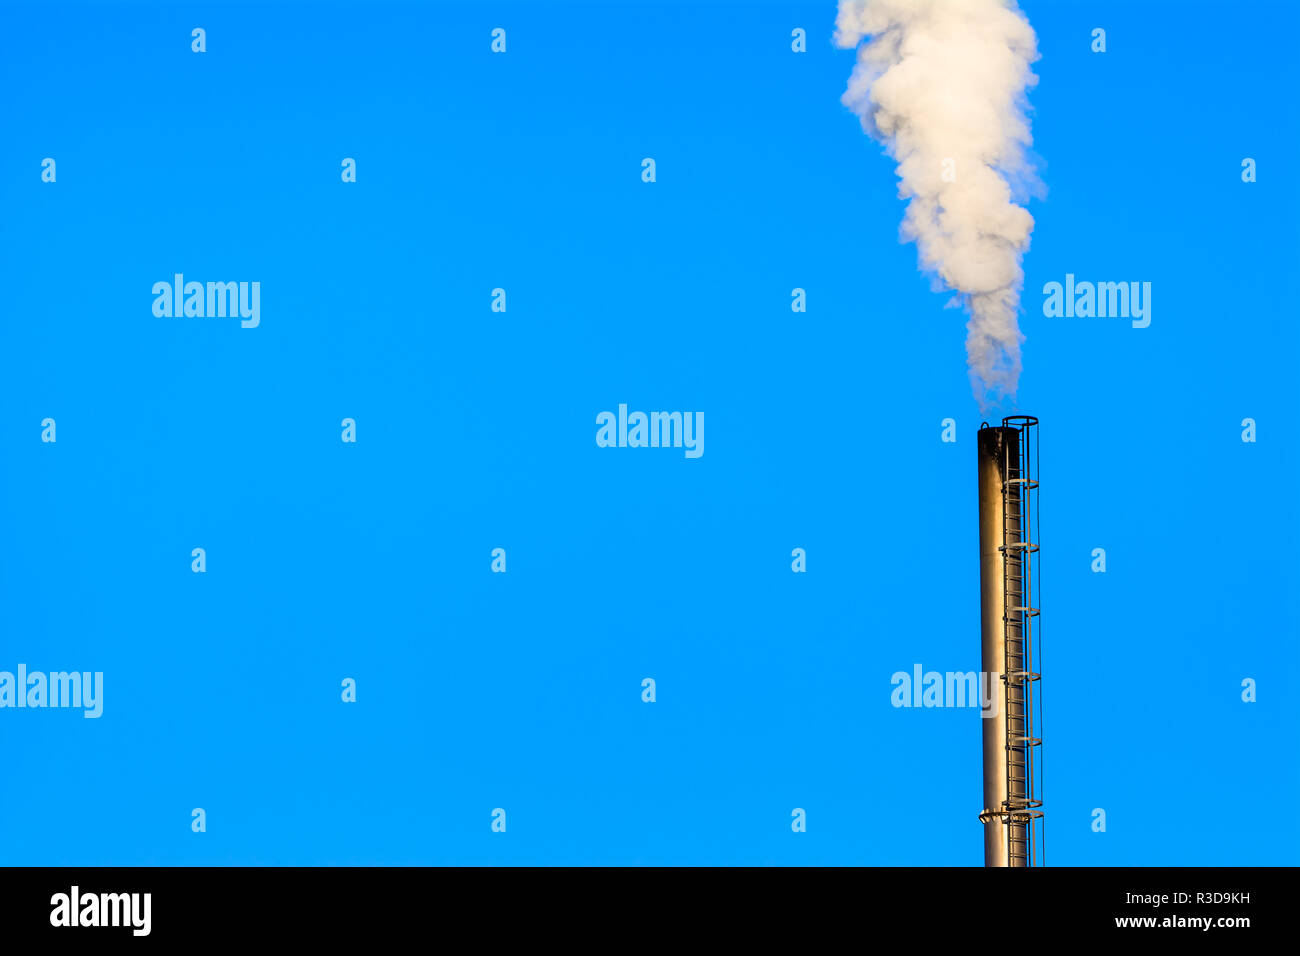 Power plant smokestack with carbon emission - co2, dioxide or fossil fuel. Air pollution by industry. Chimney and smoke cloud on blue sky background. Stock Photo